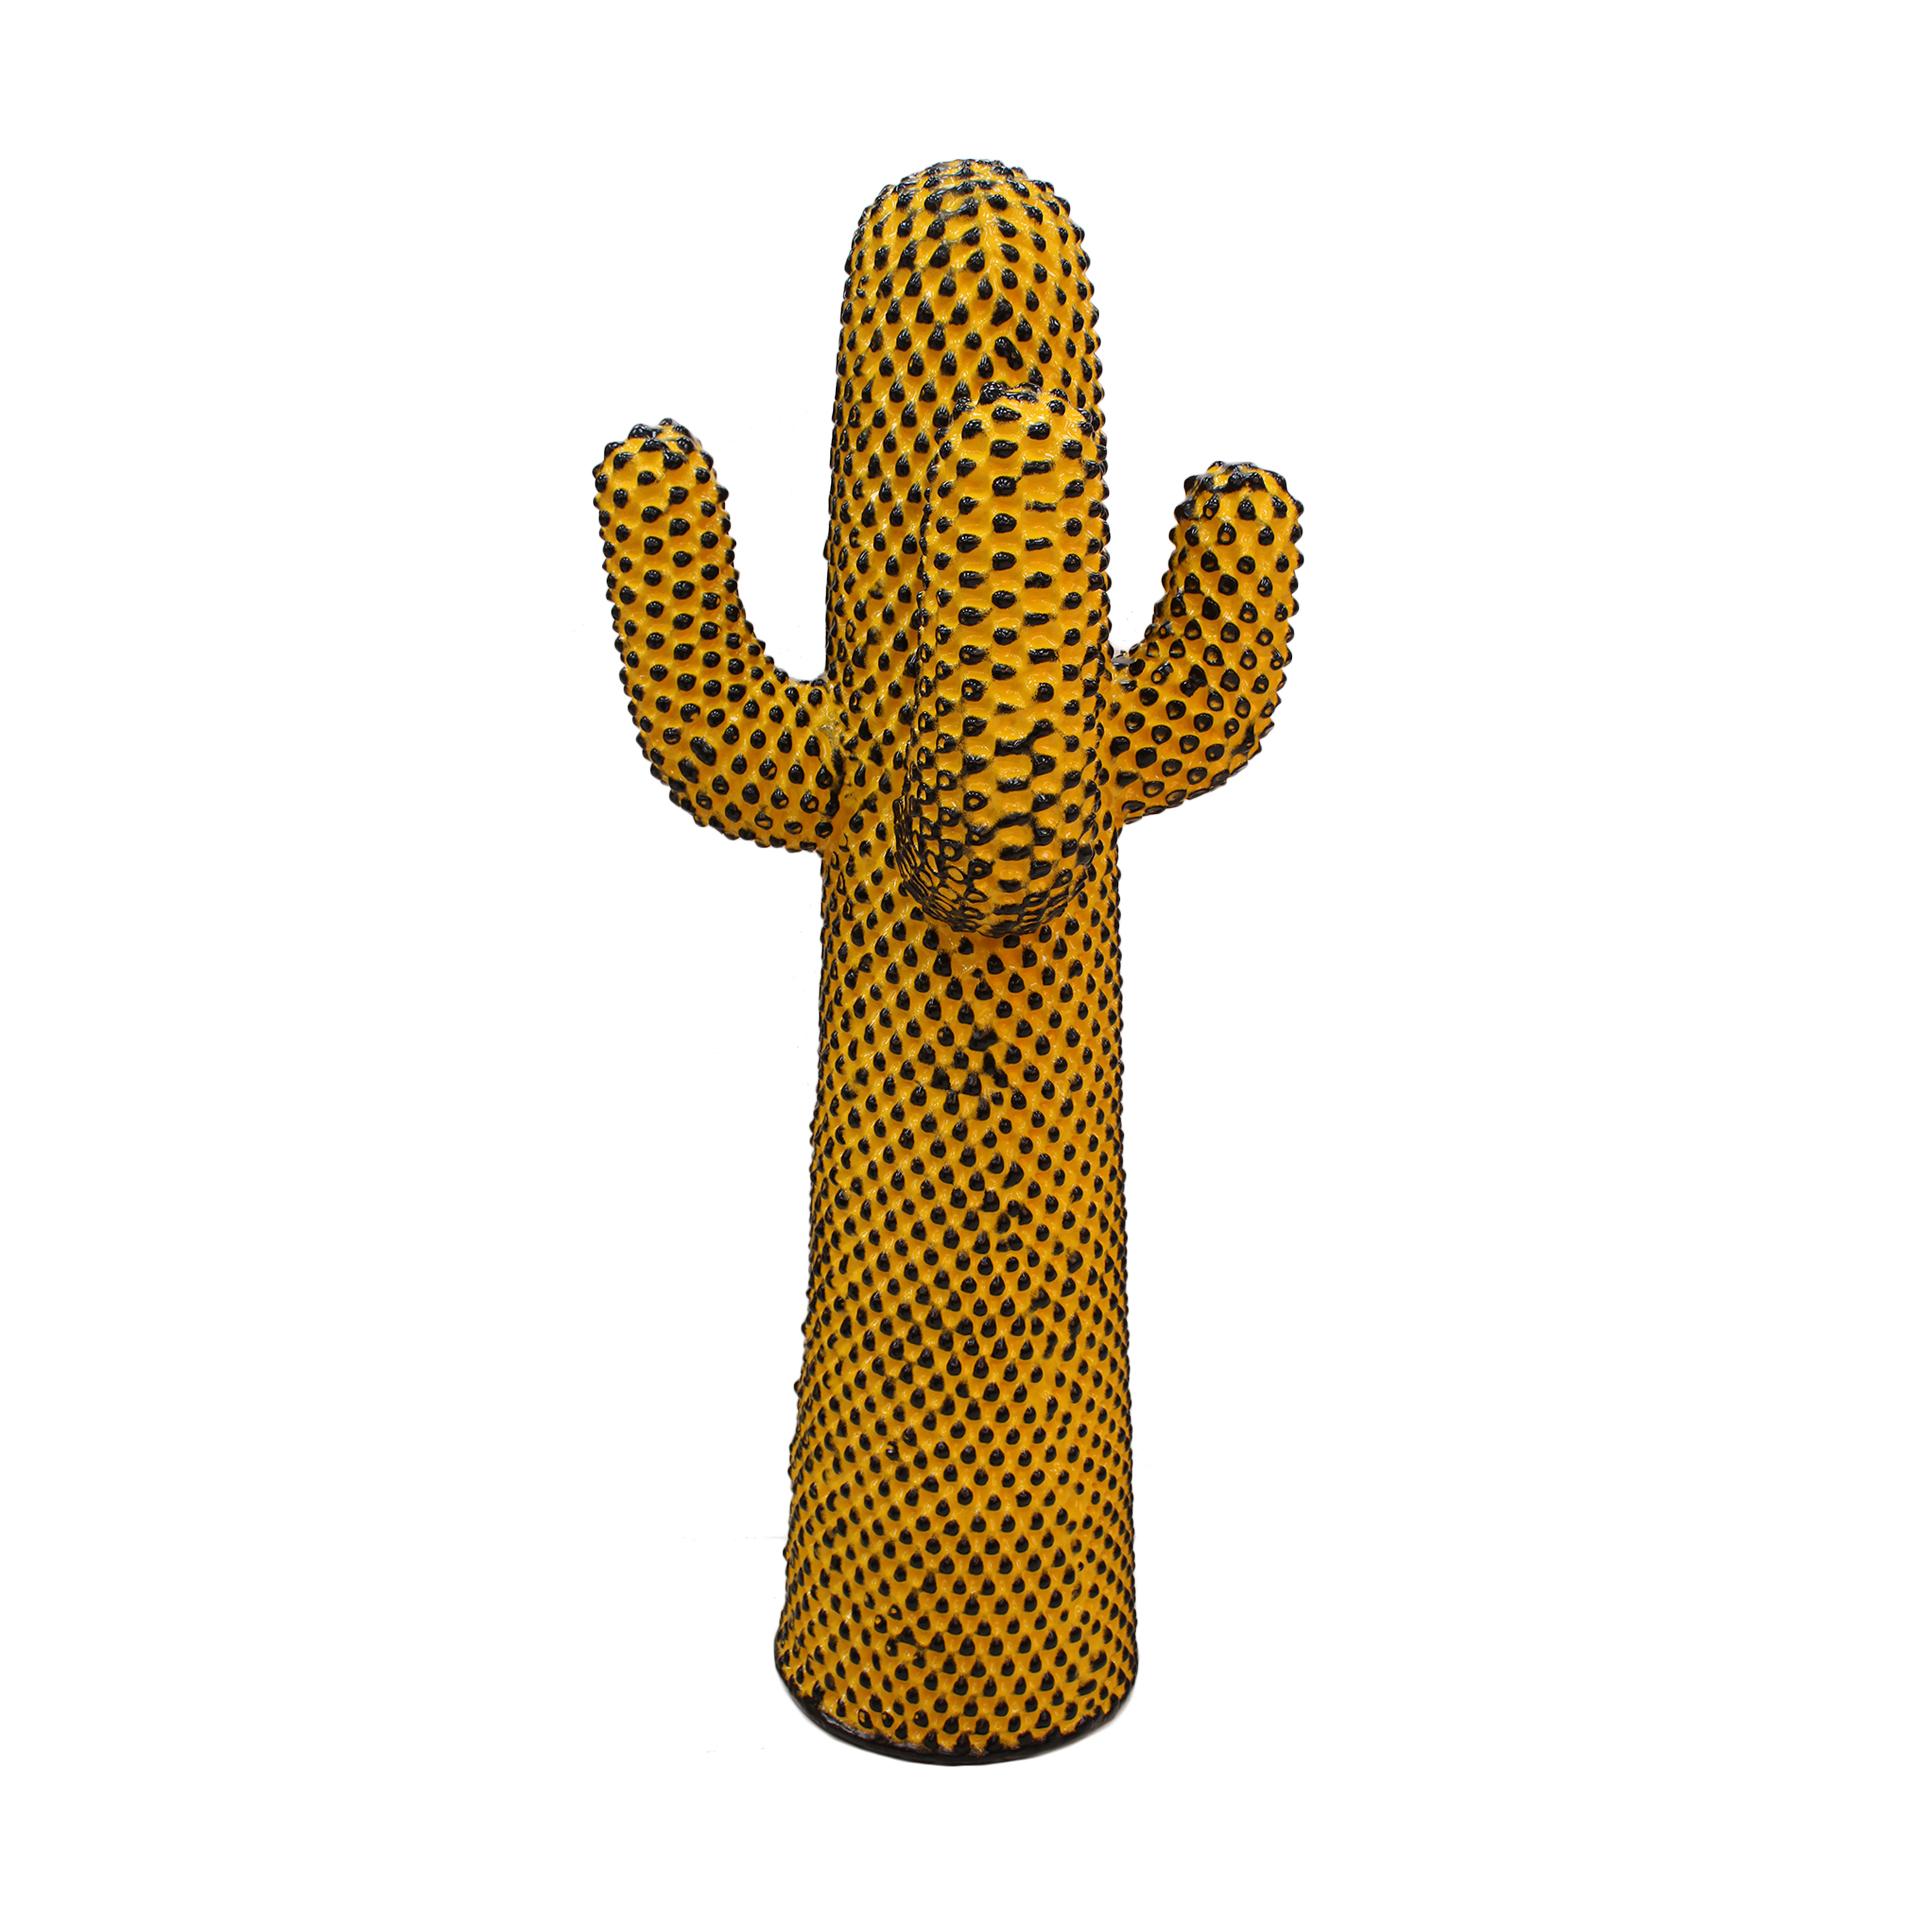 Cactus model coat rack designed by Guido Drocco and Franco Mello. Edited by Gufram. Special edition of 99 copies in collaboration with the Andy Warhol Foundation for the Visual Arts. Numbered and signed piece with a stamp by the Andy Warhol